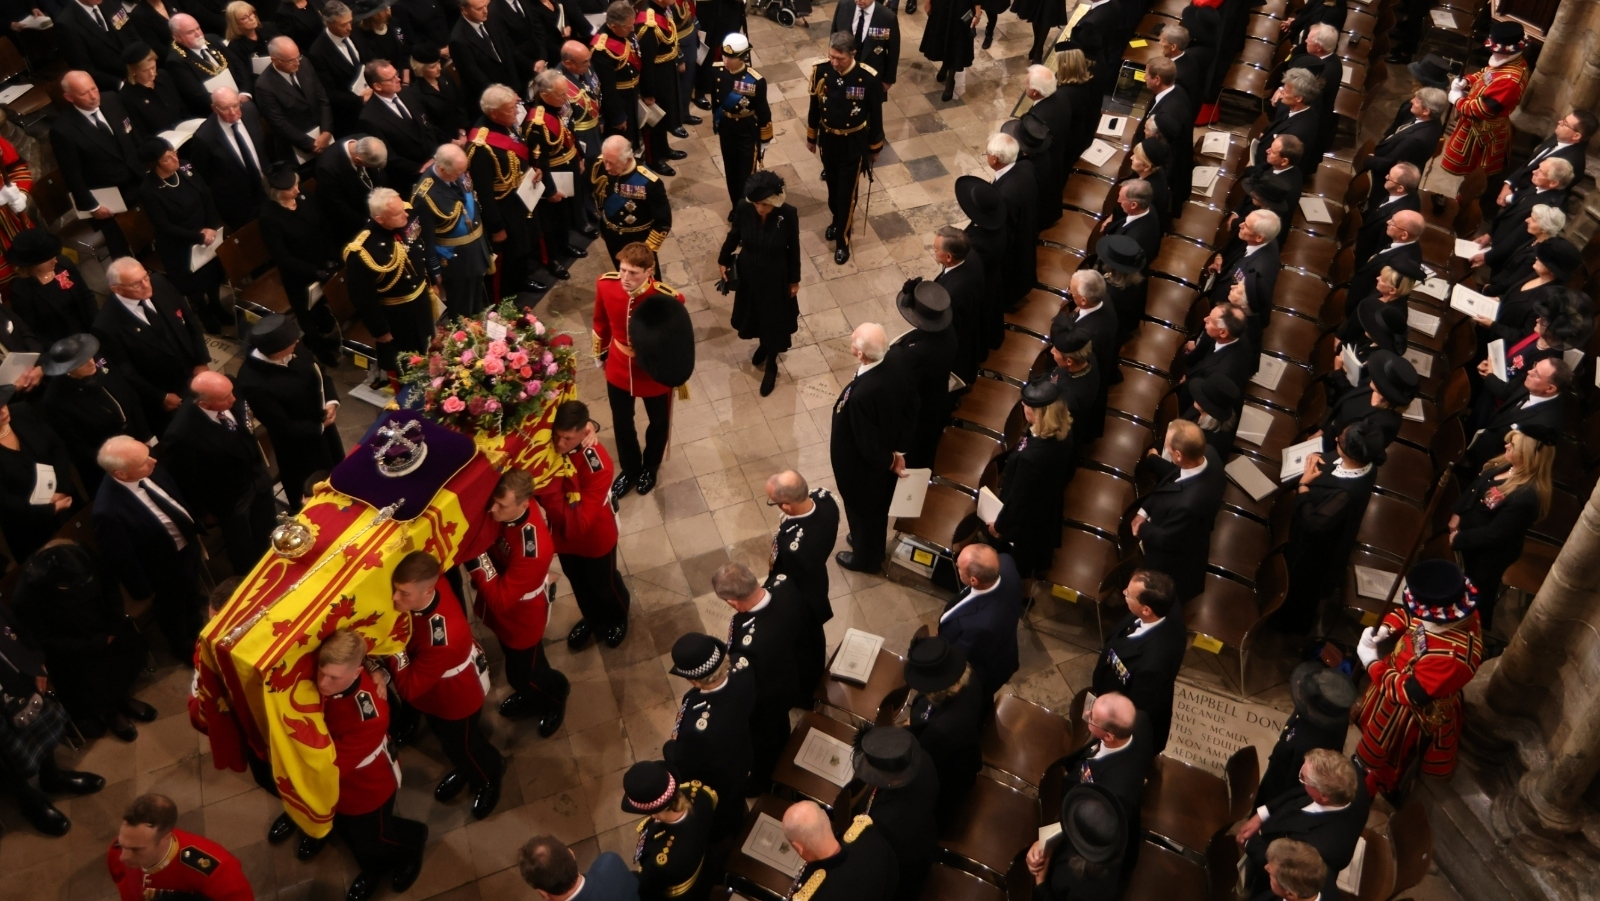 Representatives from around the world attended the service at Westminster Abbey. (Image: Getty Images)